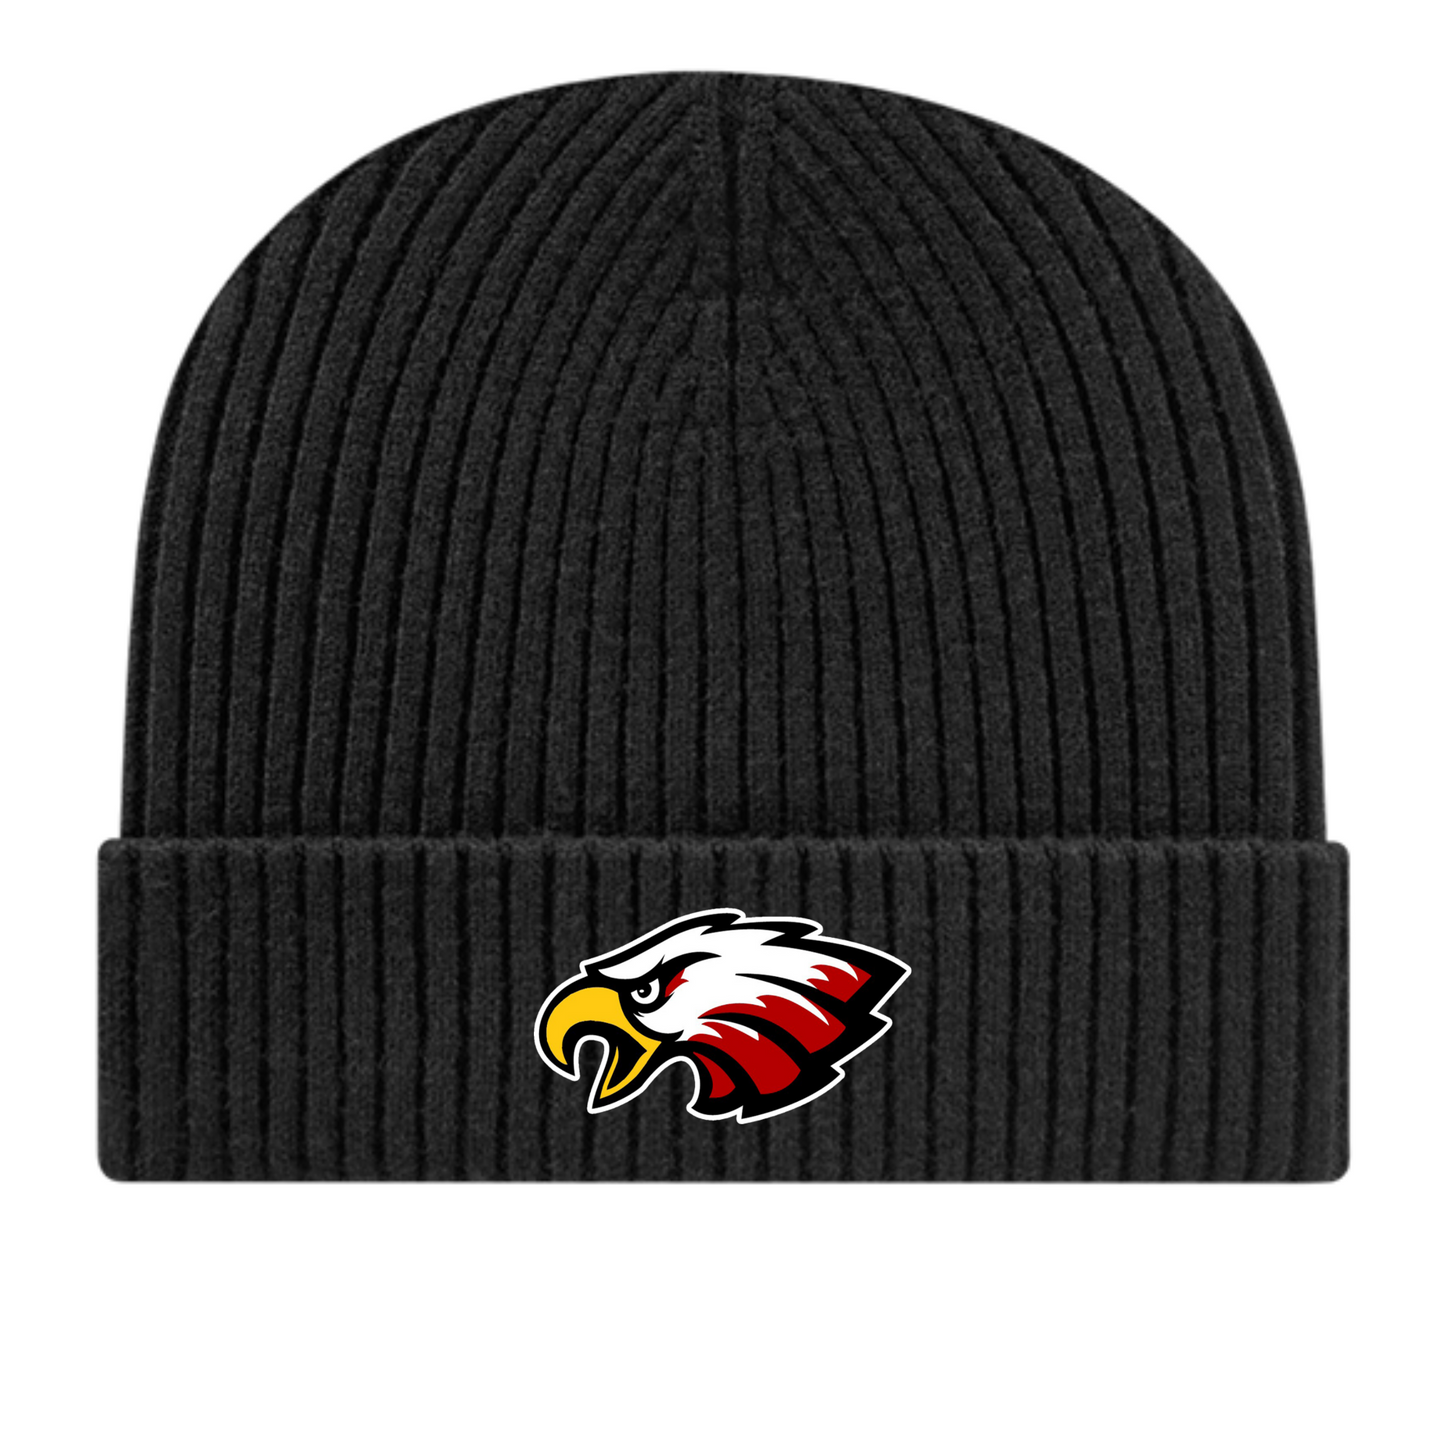 Southern Boone Basketball Premium Knit Cap with Cuff - IK8550